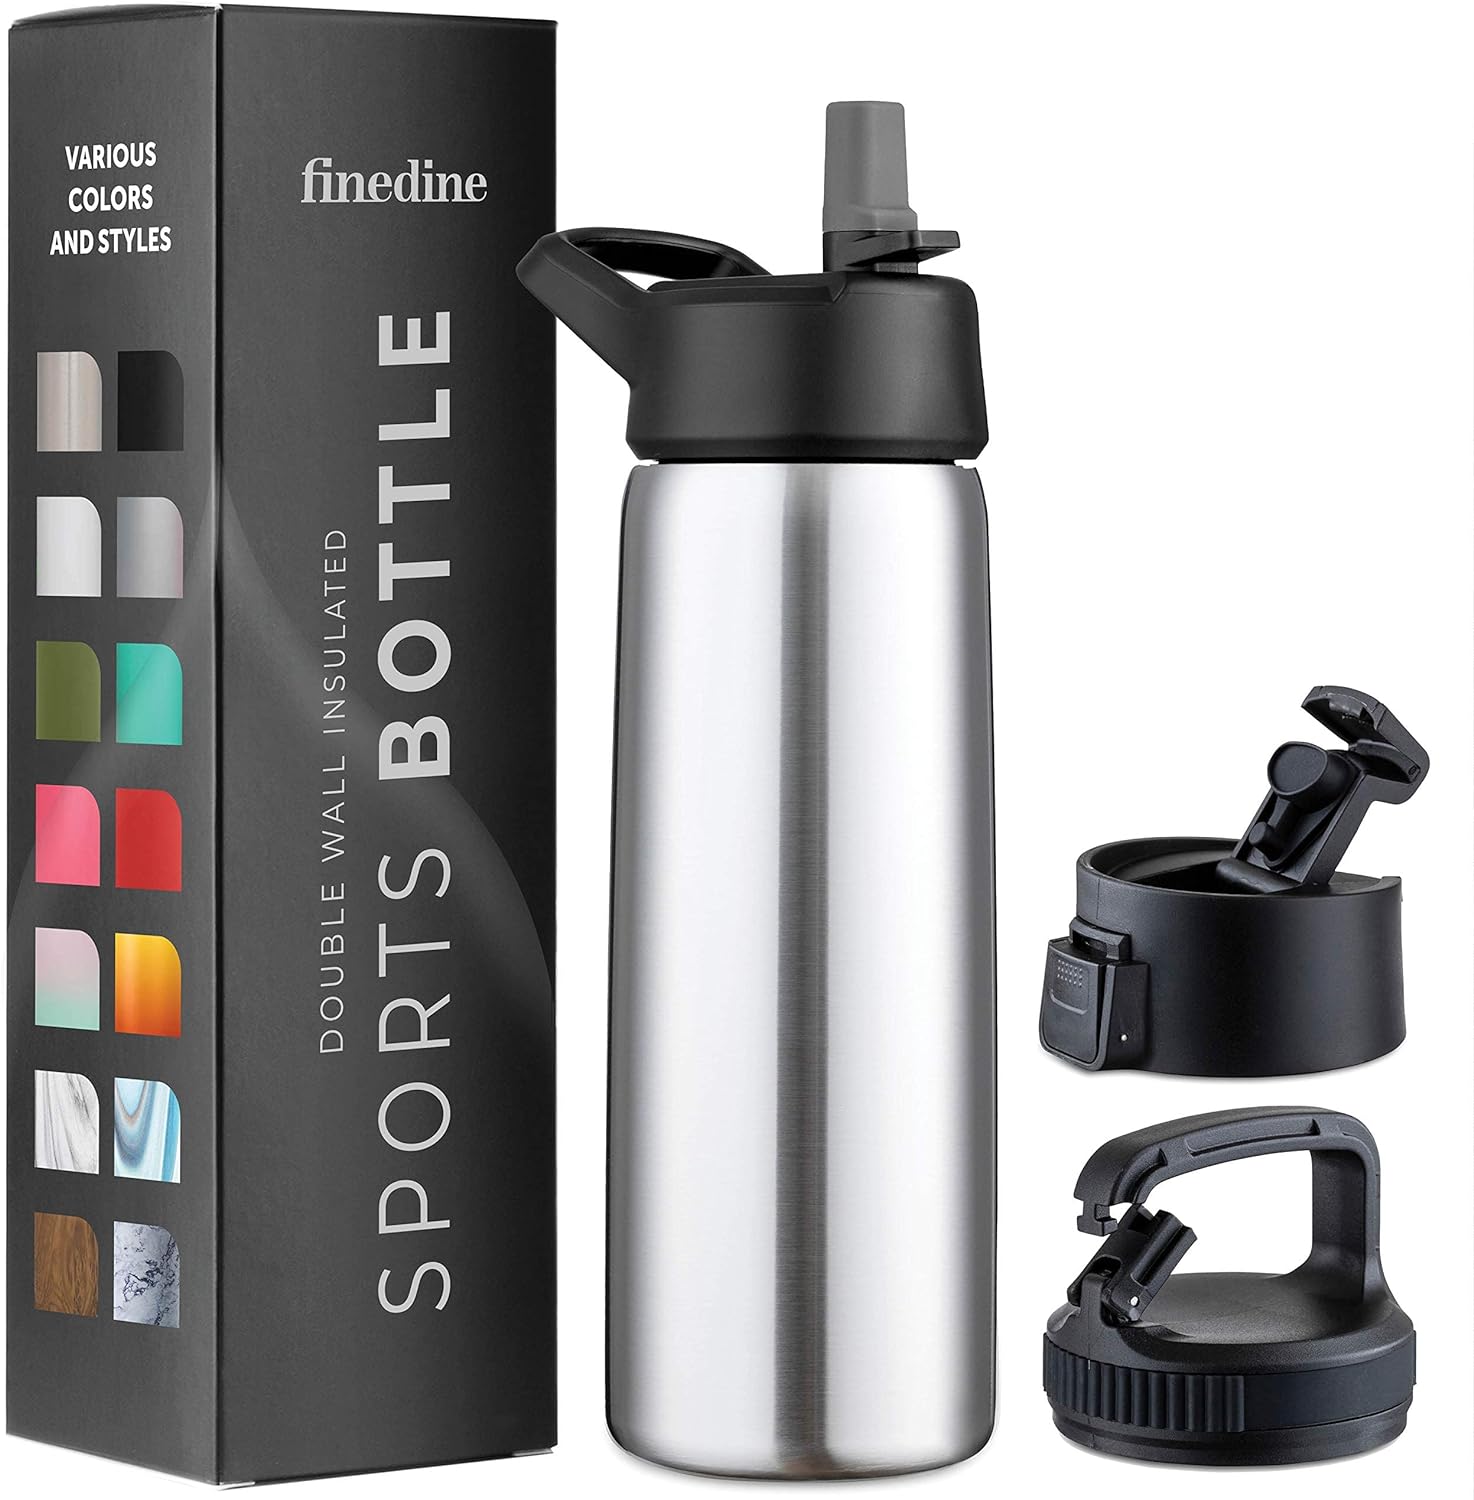 FineDine Insulated Water Bottles with Straw - 25 Oz Stainless Steel Metal Water Bottle W/ 3 Lids - Reusable for Travel, Camping, Bike, Sports - Brushed Stainless Steel